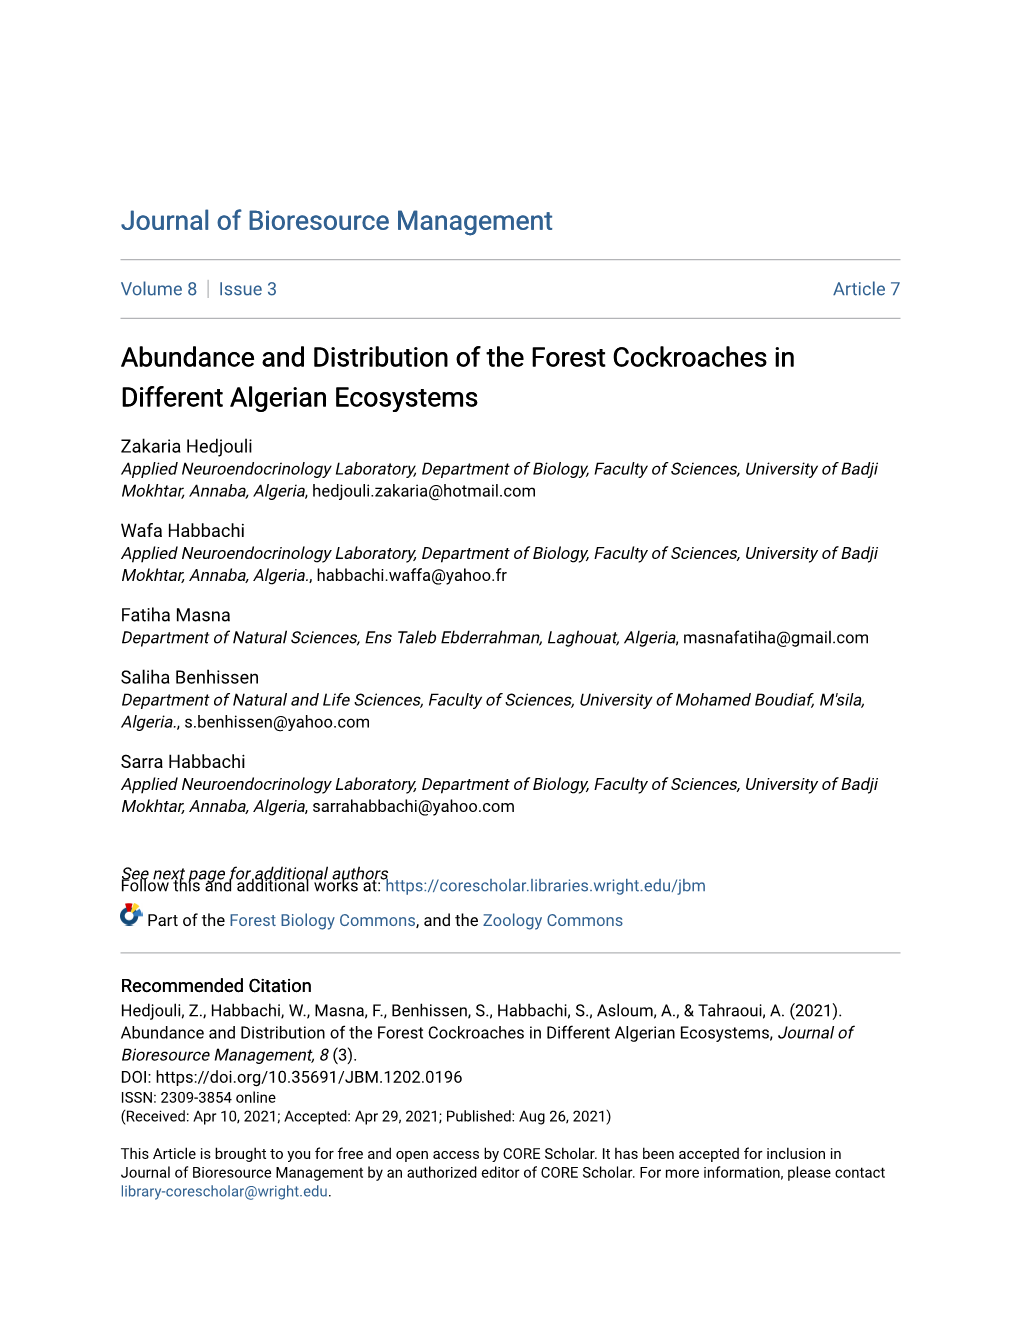 Abundance and Distribution of the Forest Cockroaches in Different Algerian Ecosystems